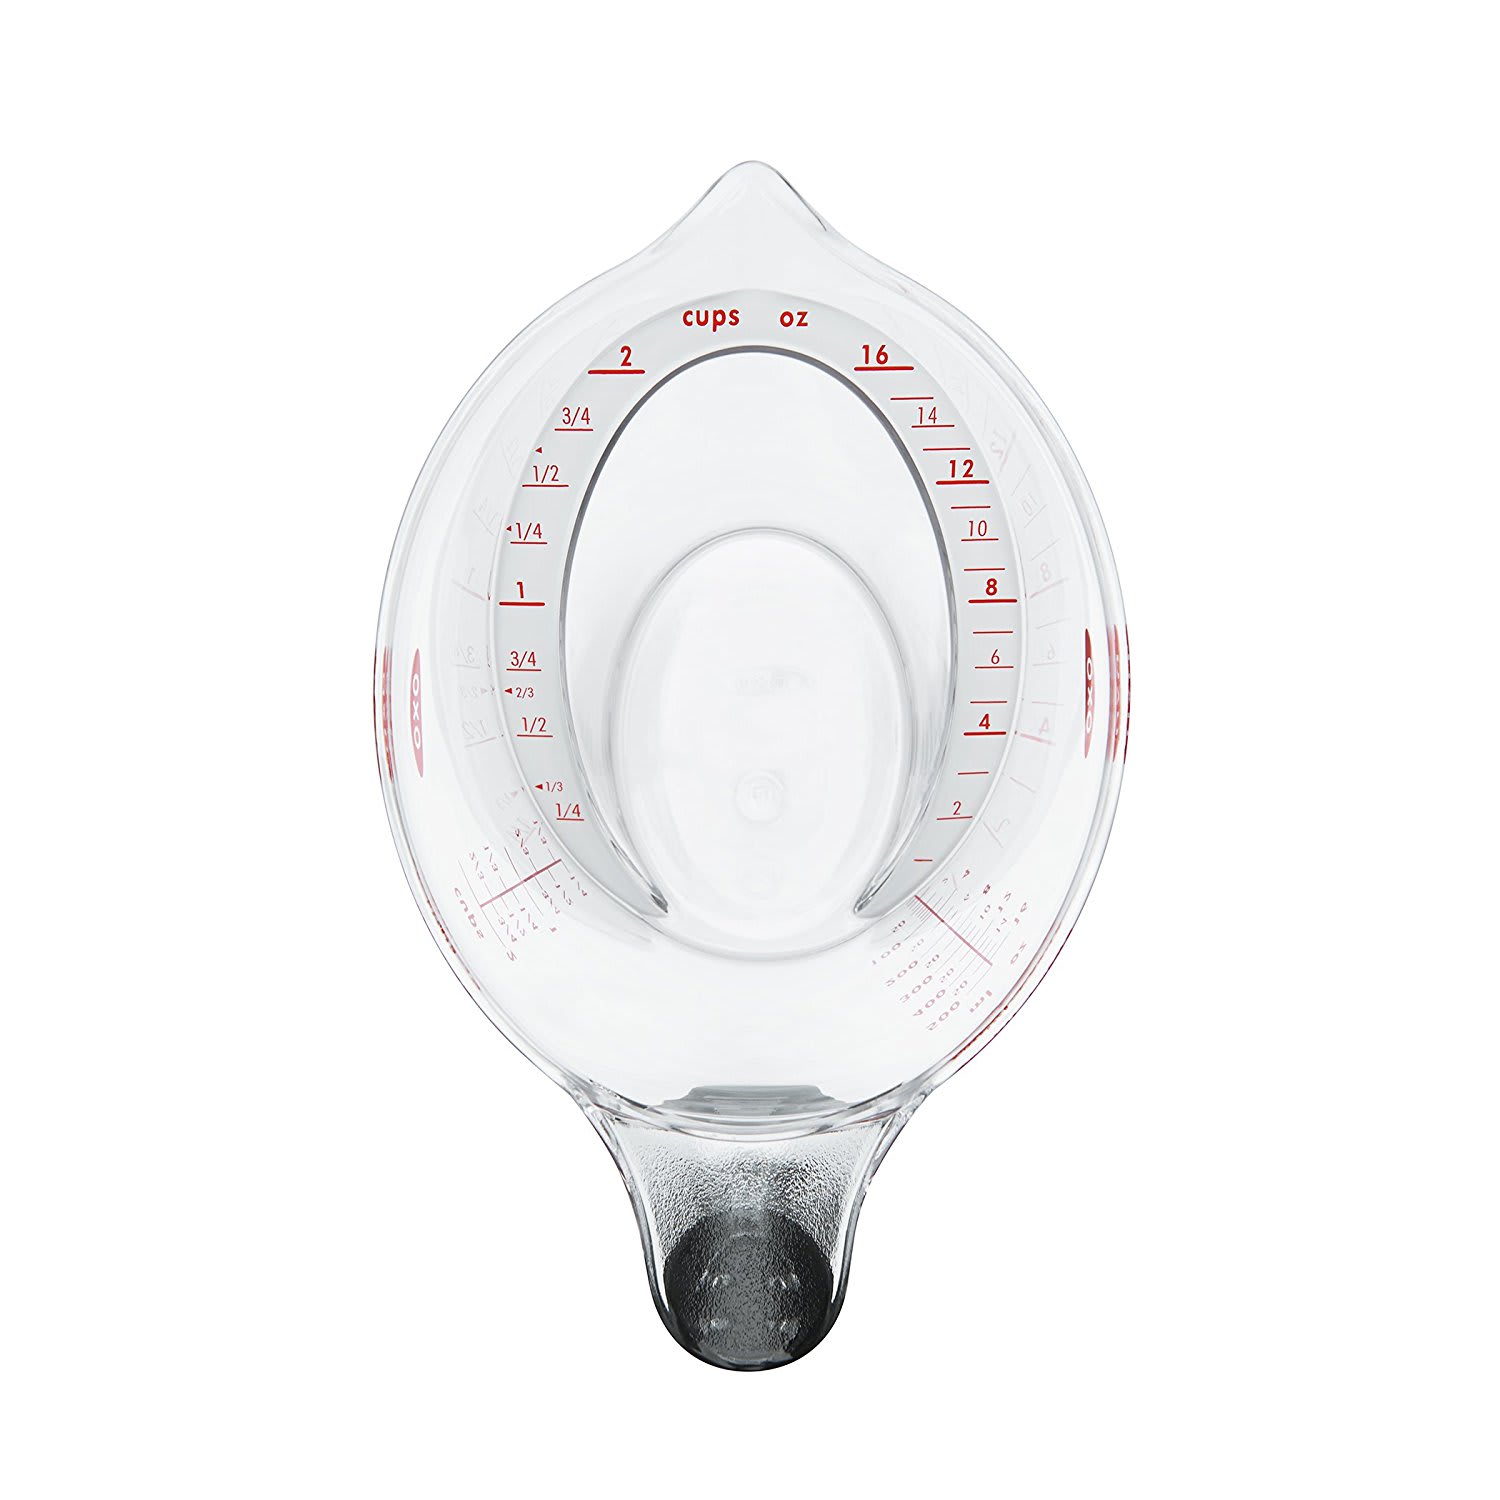 https://media-cldnry.s-nbcnews.com/image/upload/newscms/2018_30/1355413/oxo-angled-measuring-cup-overhead.jpg